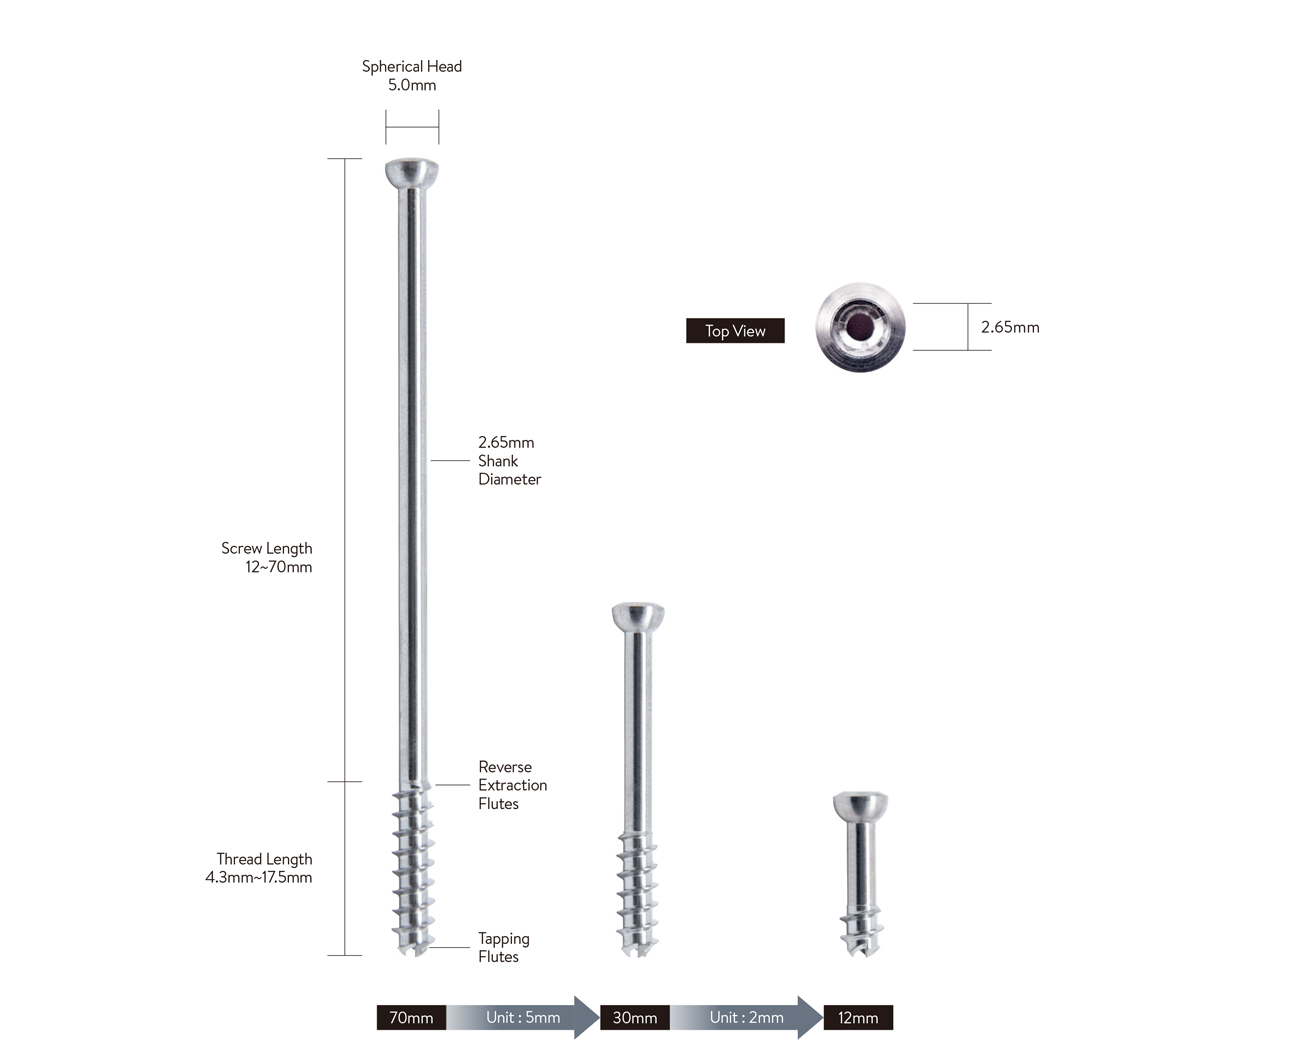 SPECIFICATION OF CCS 4.0 CANNULATED SCREW SYSTEM